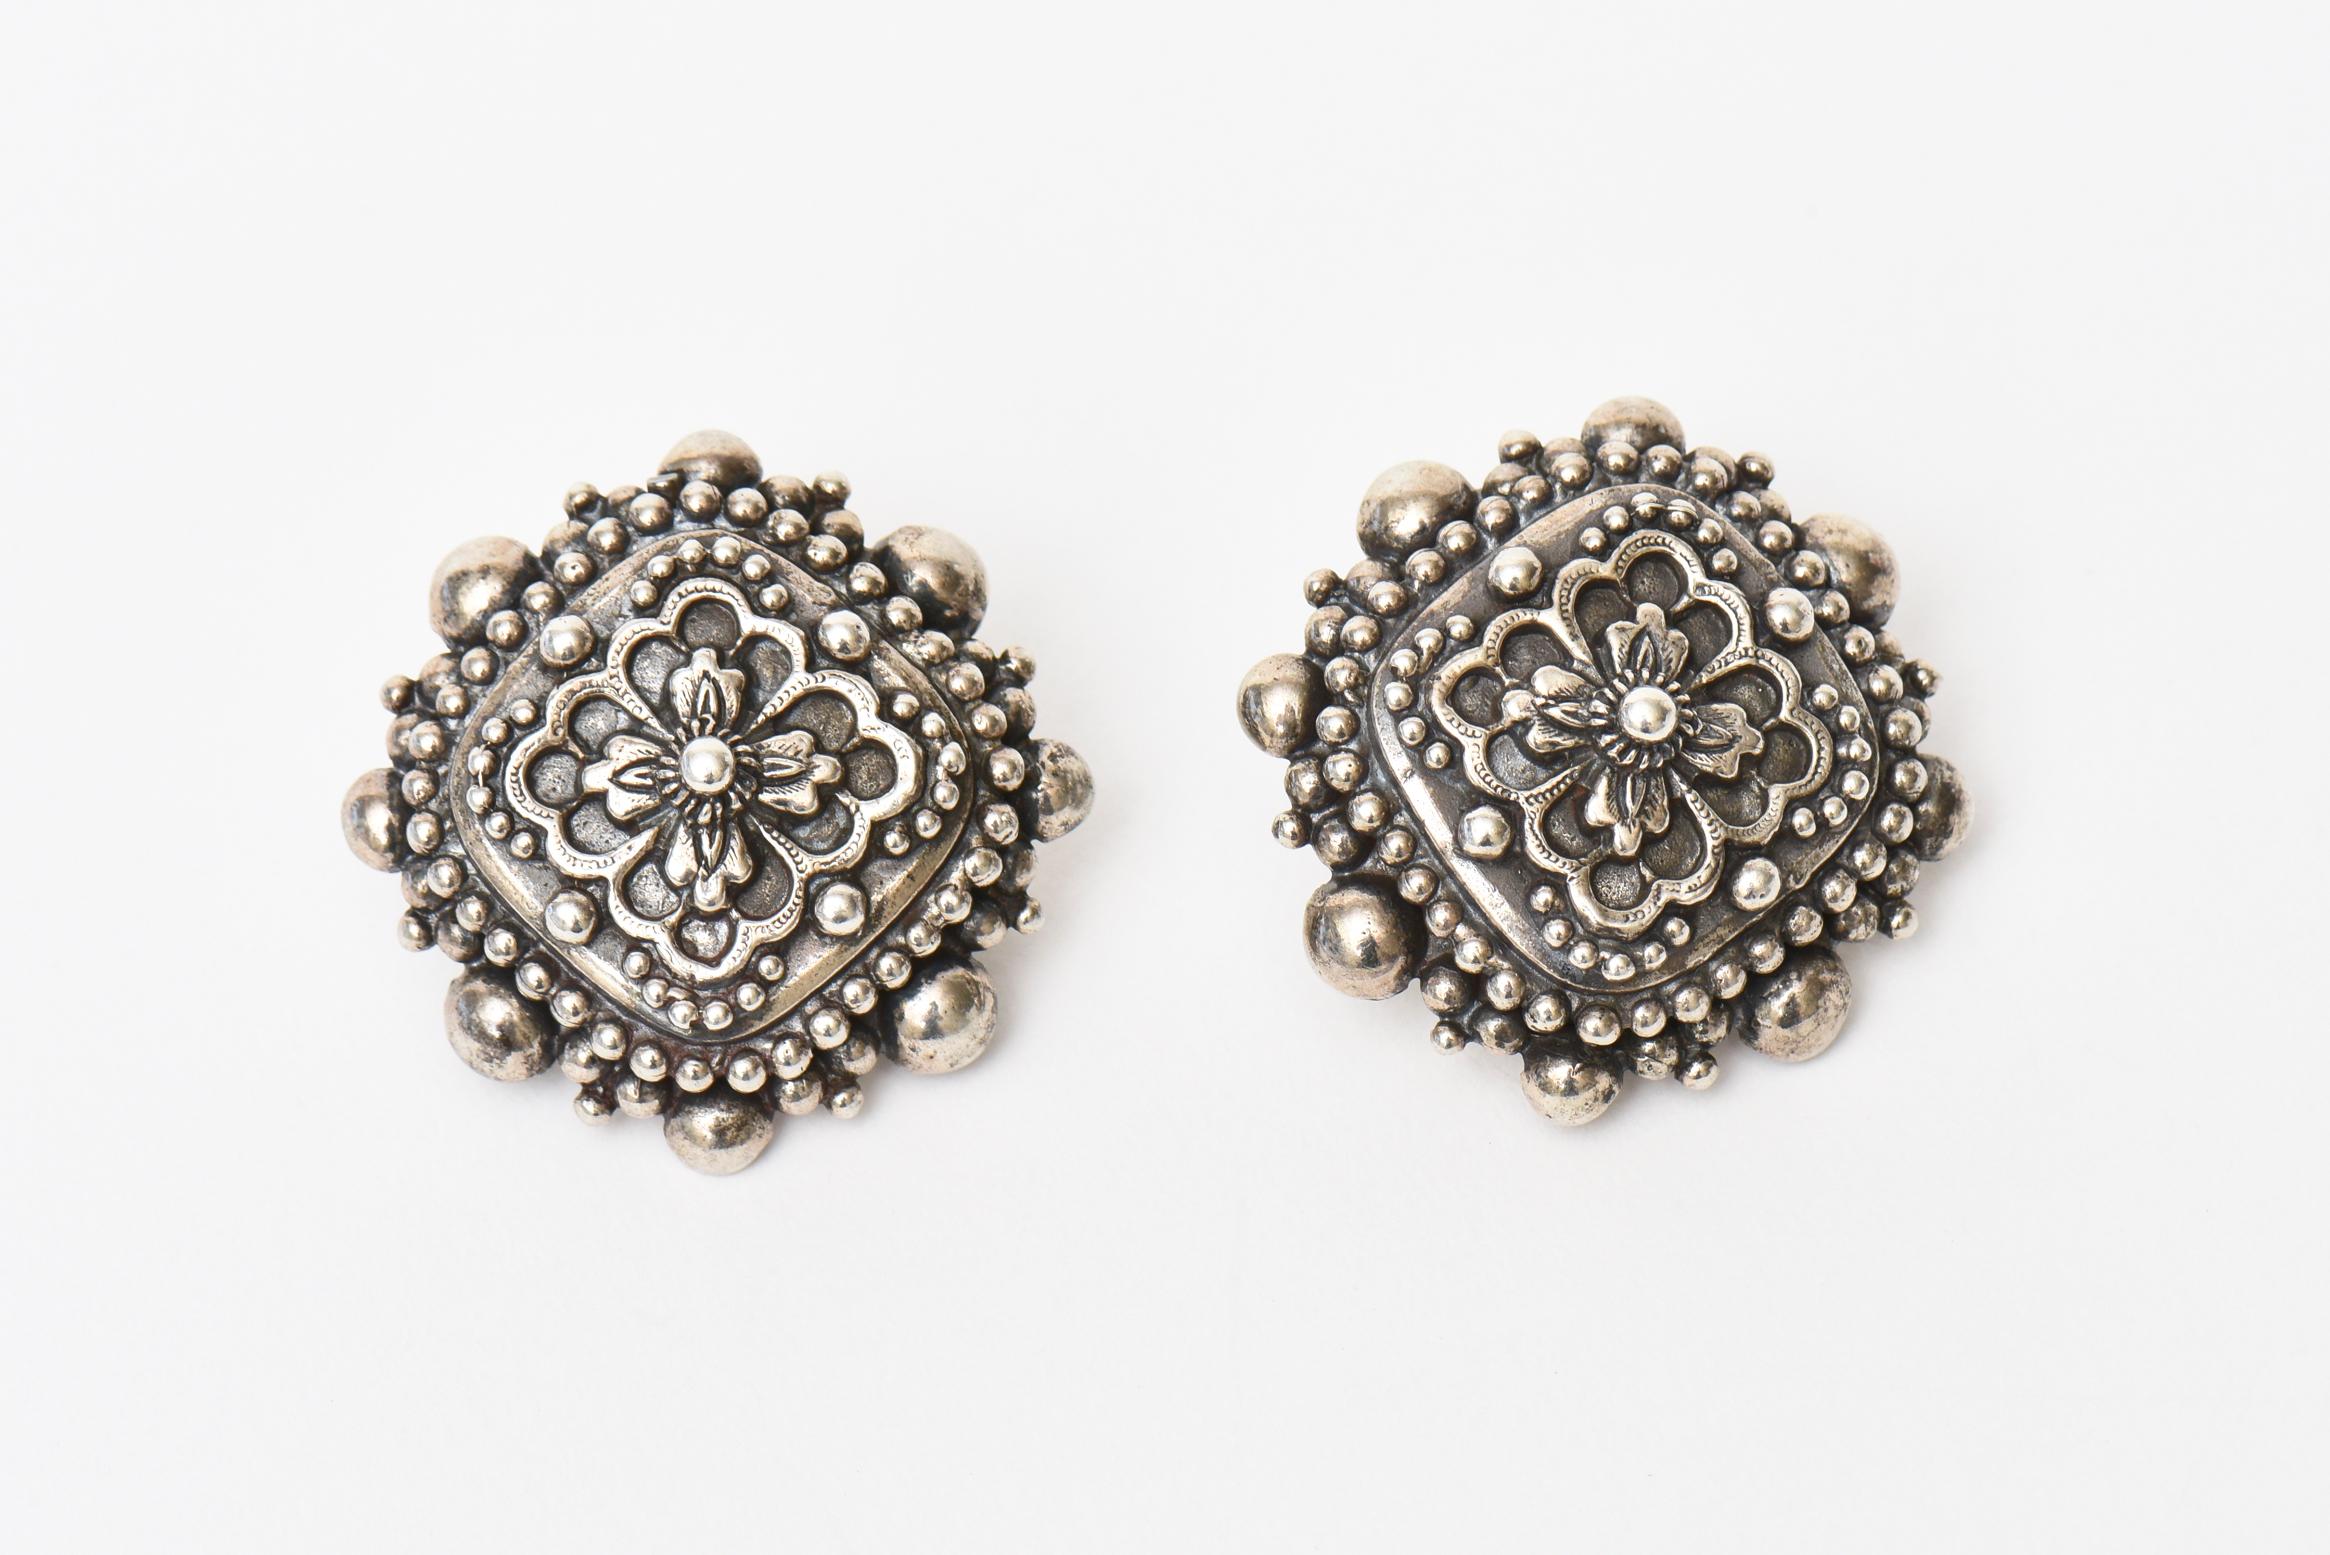 This lovely, signed and early Stephen Dweck sterling silver earrings have some great weight. They have a revival renaissance meets baroque design meets byzantine. They are stamped Stephen Dweck 1991 @ Stephen Dweck 